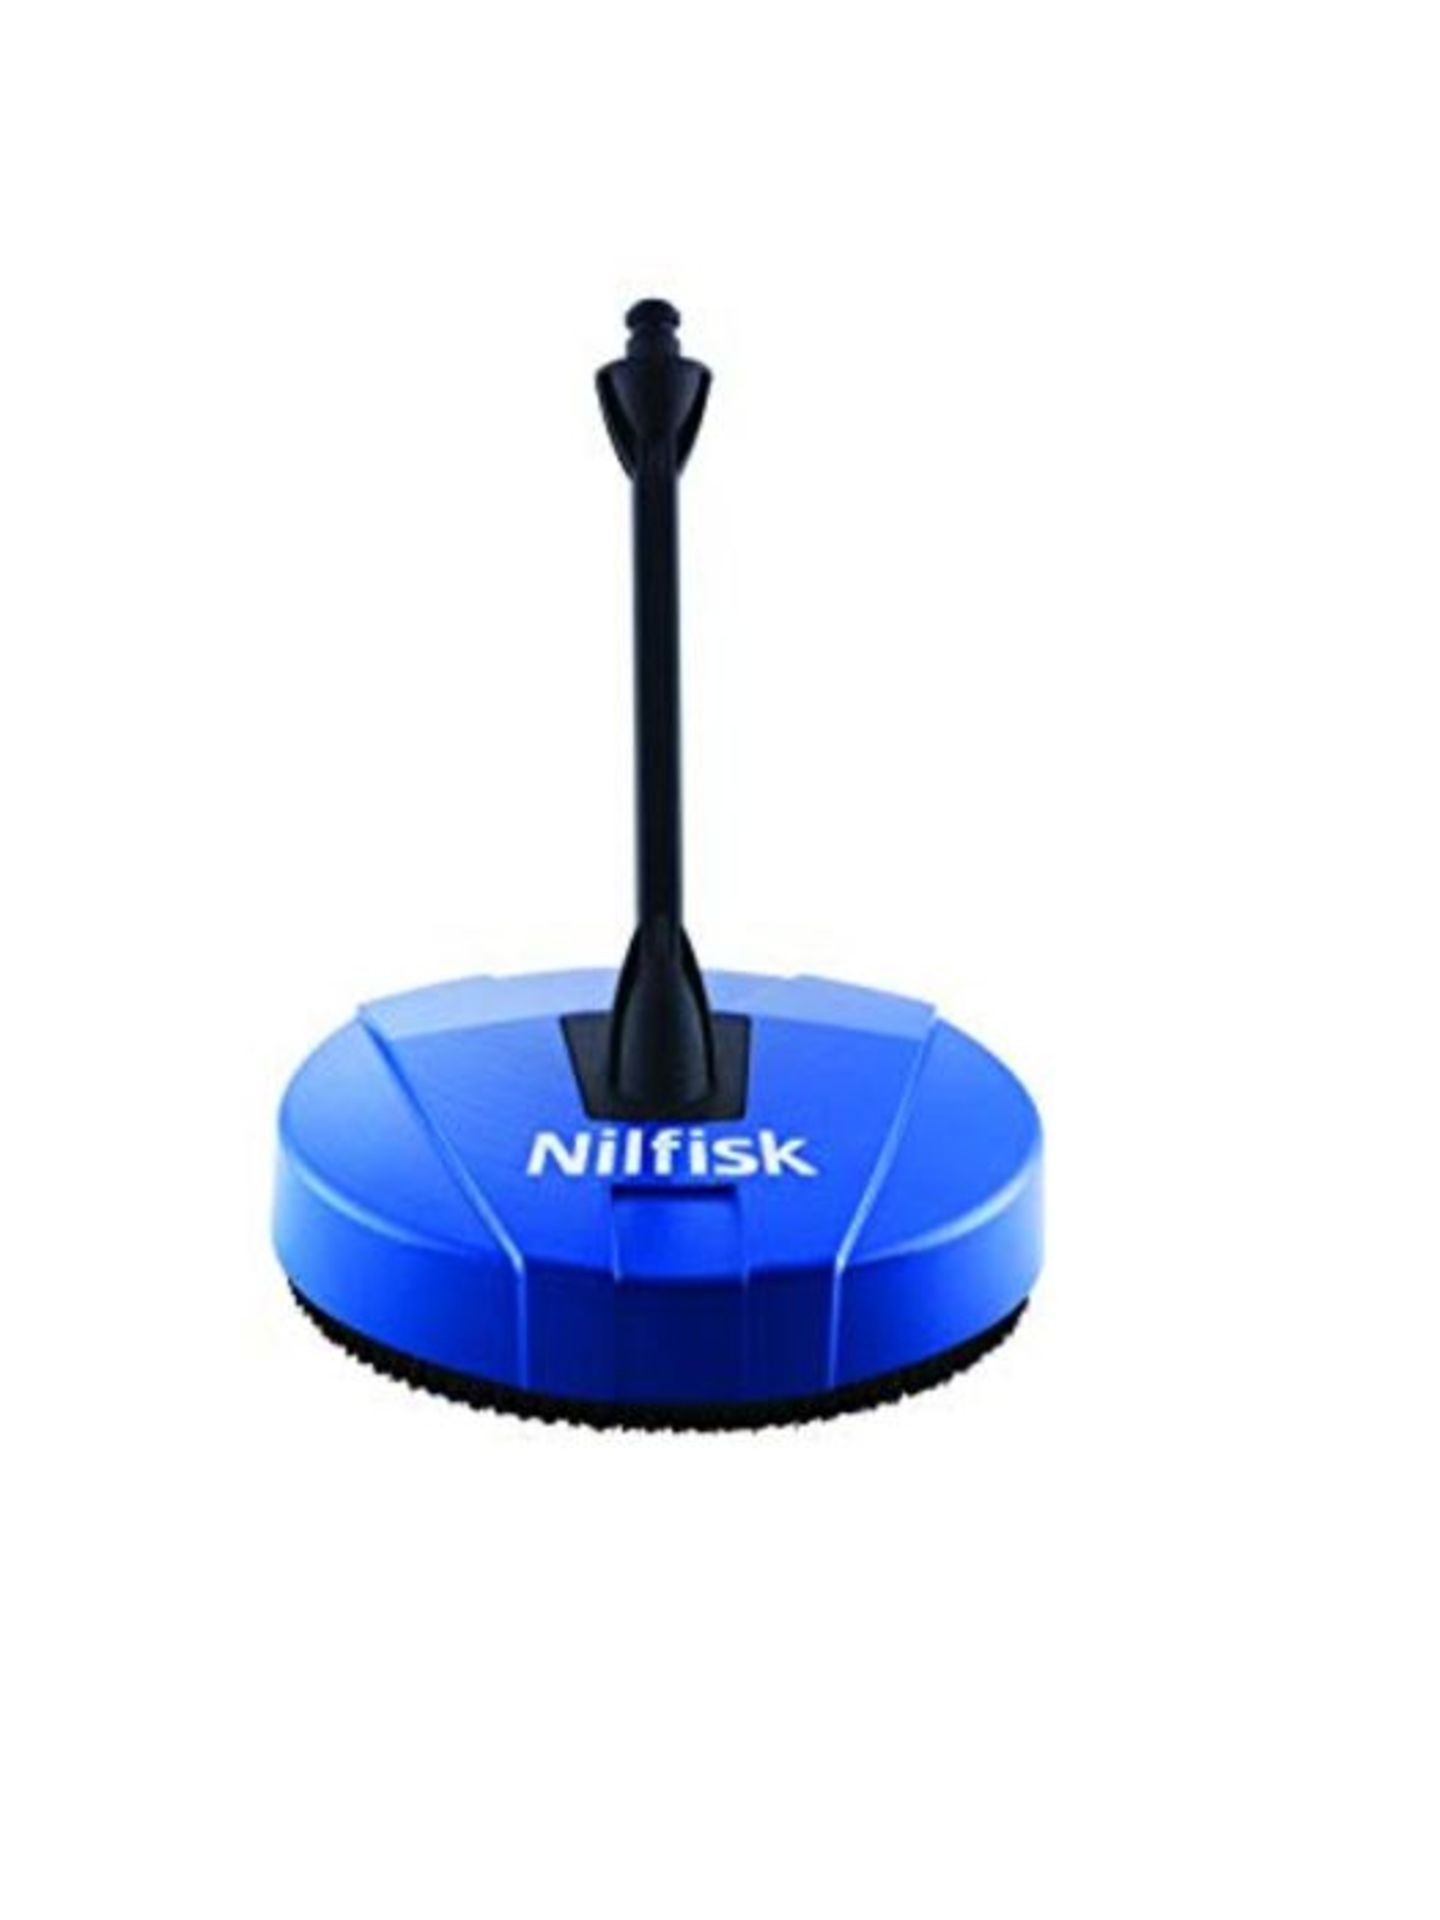 Nilfisk Compact Patio Cleaner, compatible with Nilfisk Pressure Washers